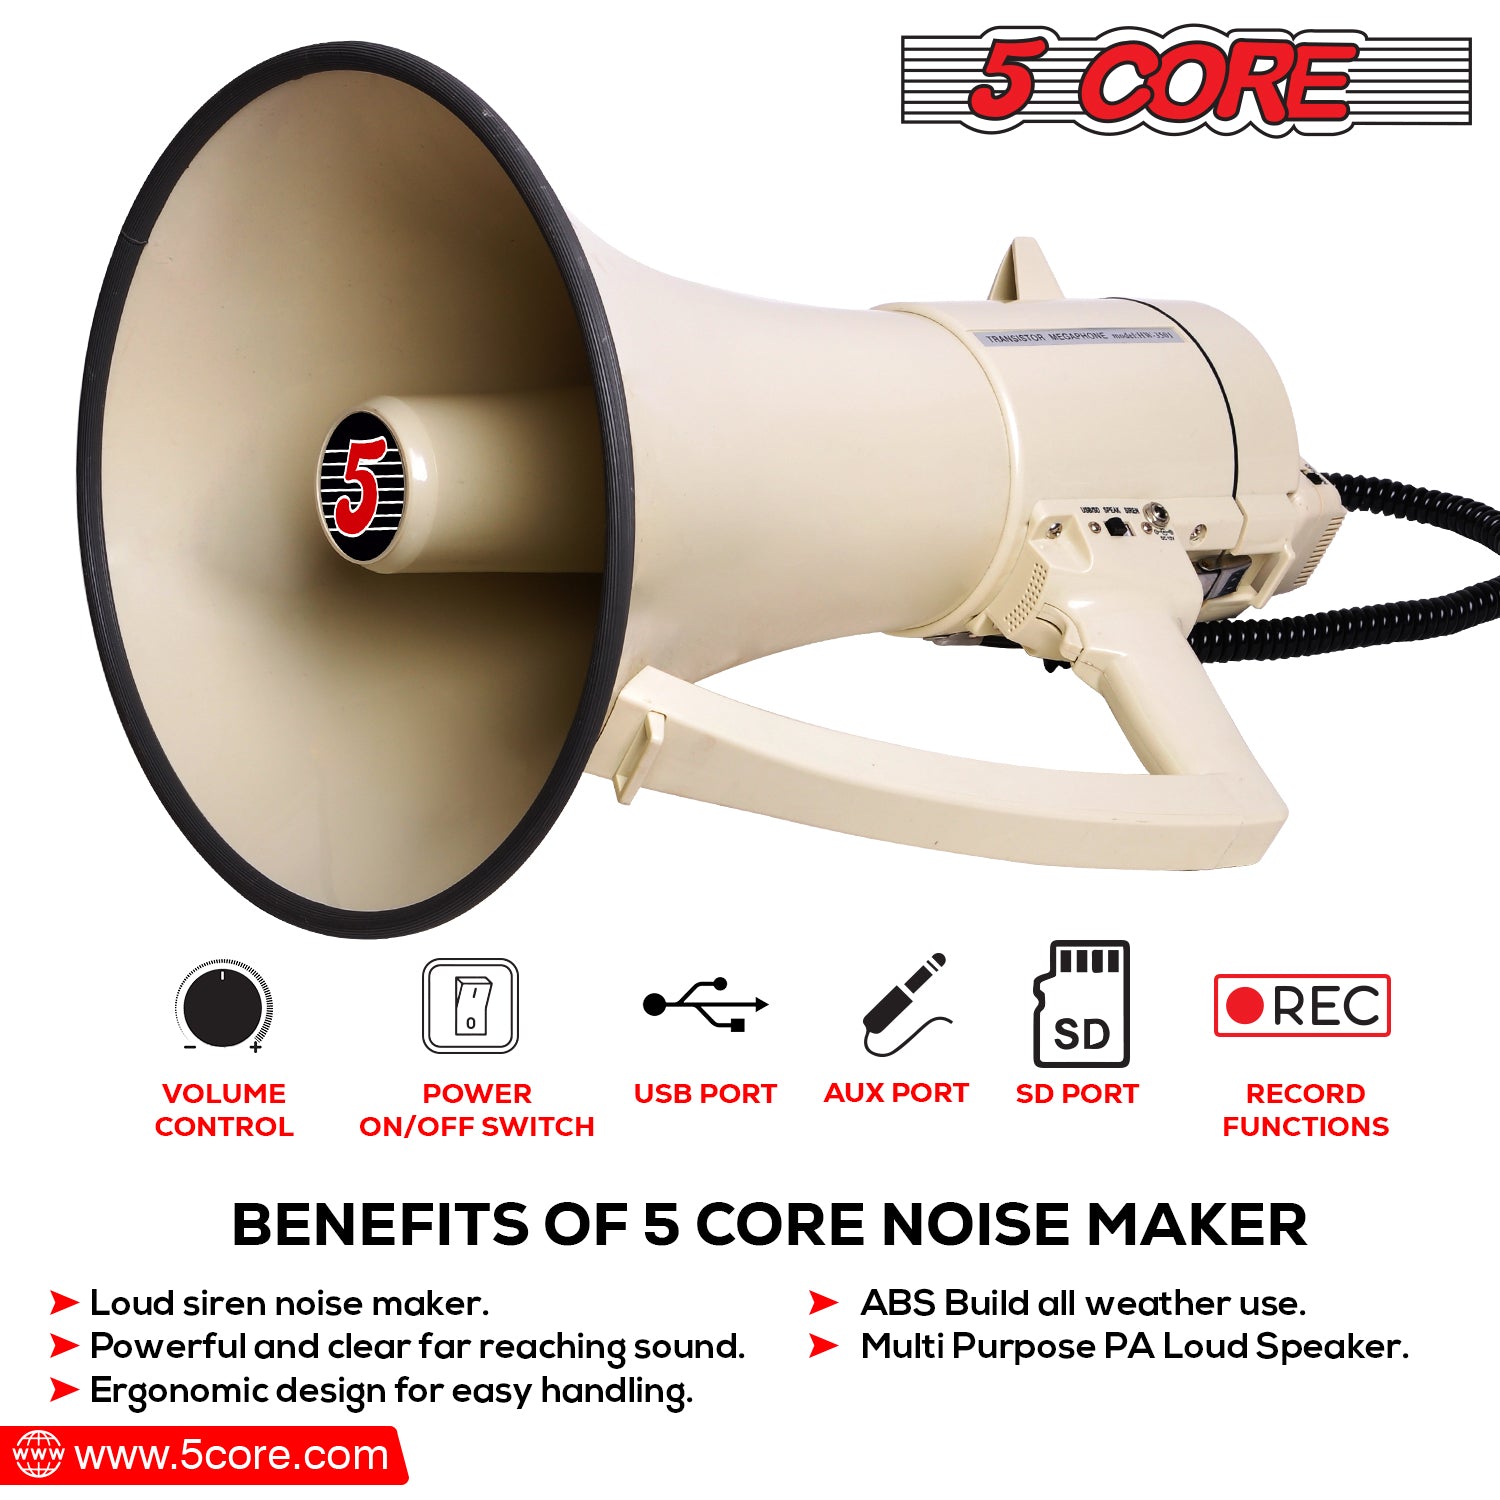 Versatile 3501 USB Megaphone - Perfect for Large Events, Sports, and Emergencies